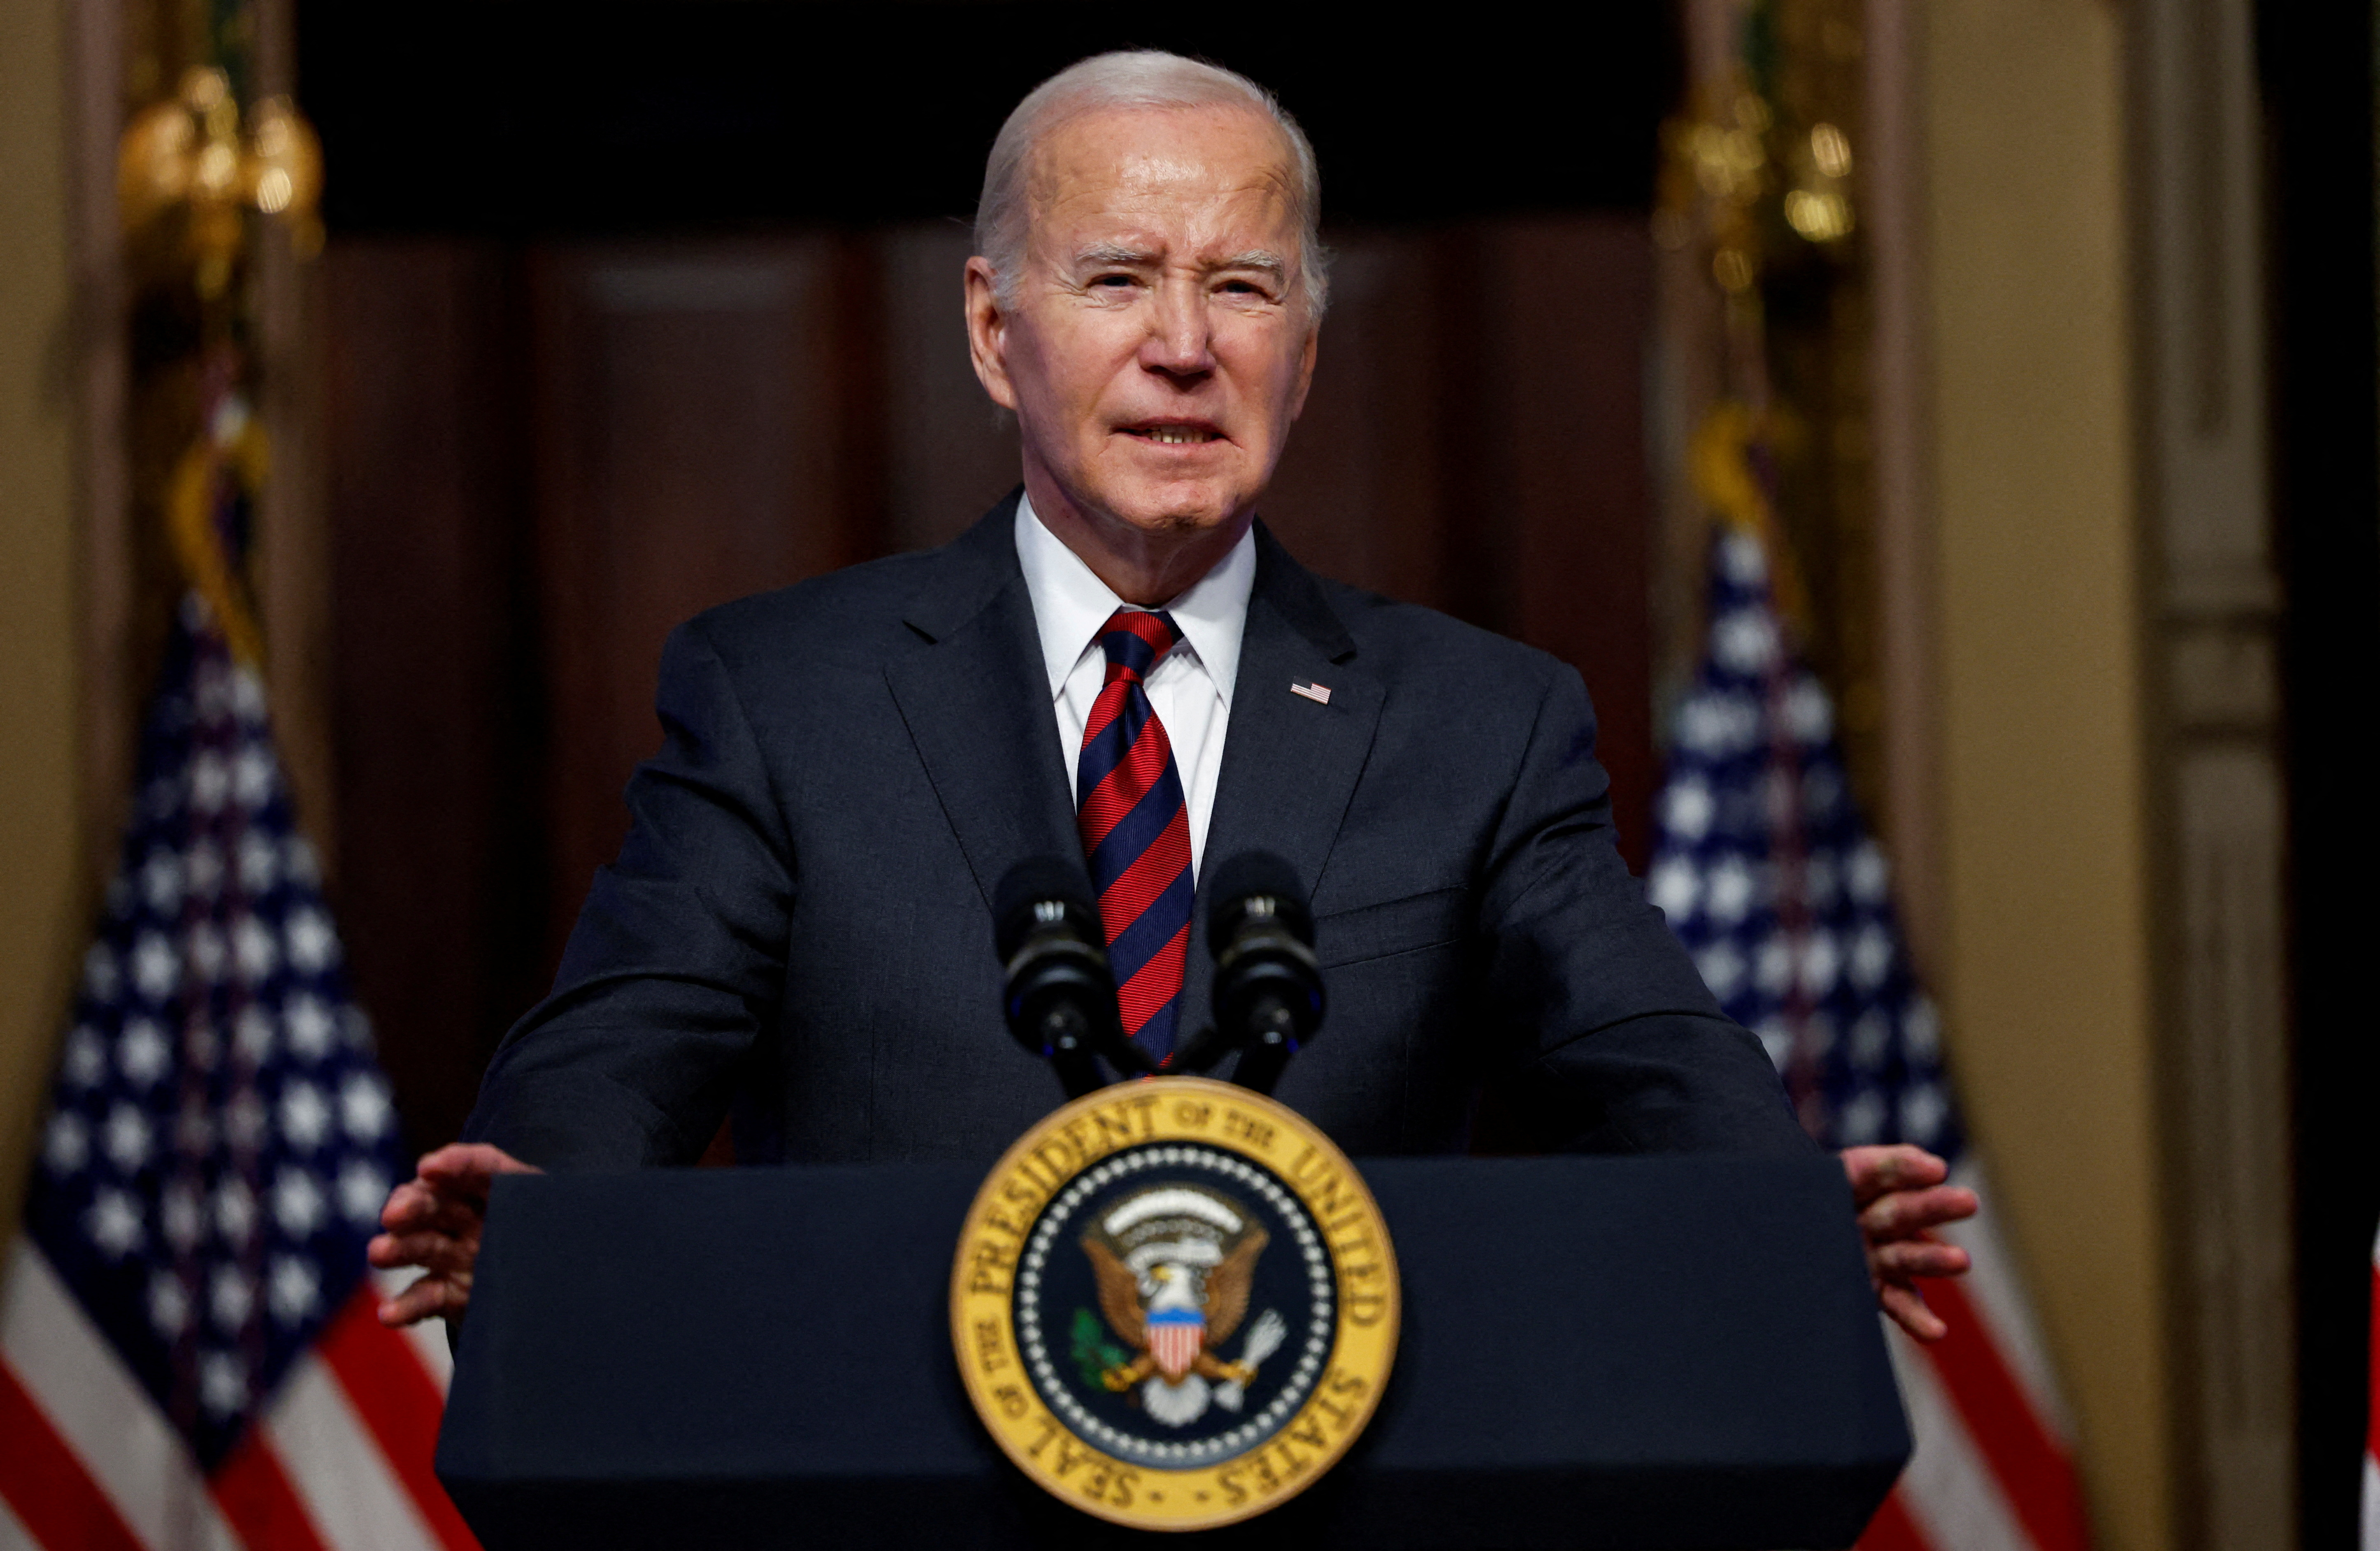 US President Biden falls to record-low 27% approval among independents - poll